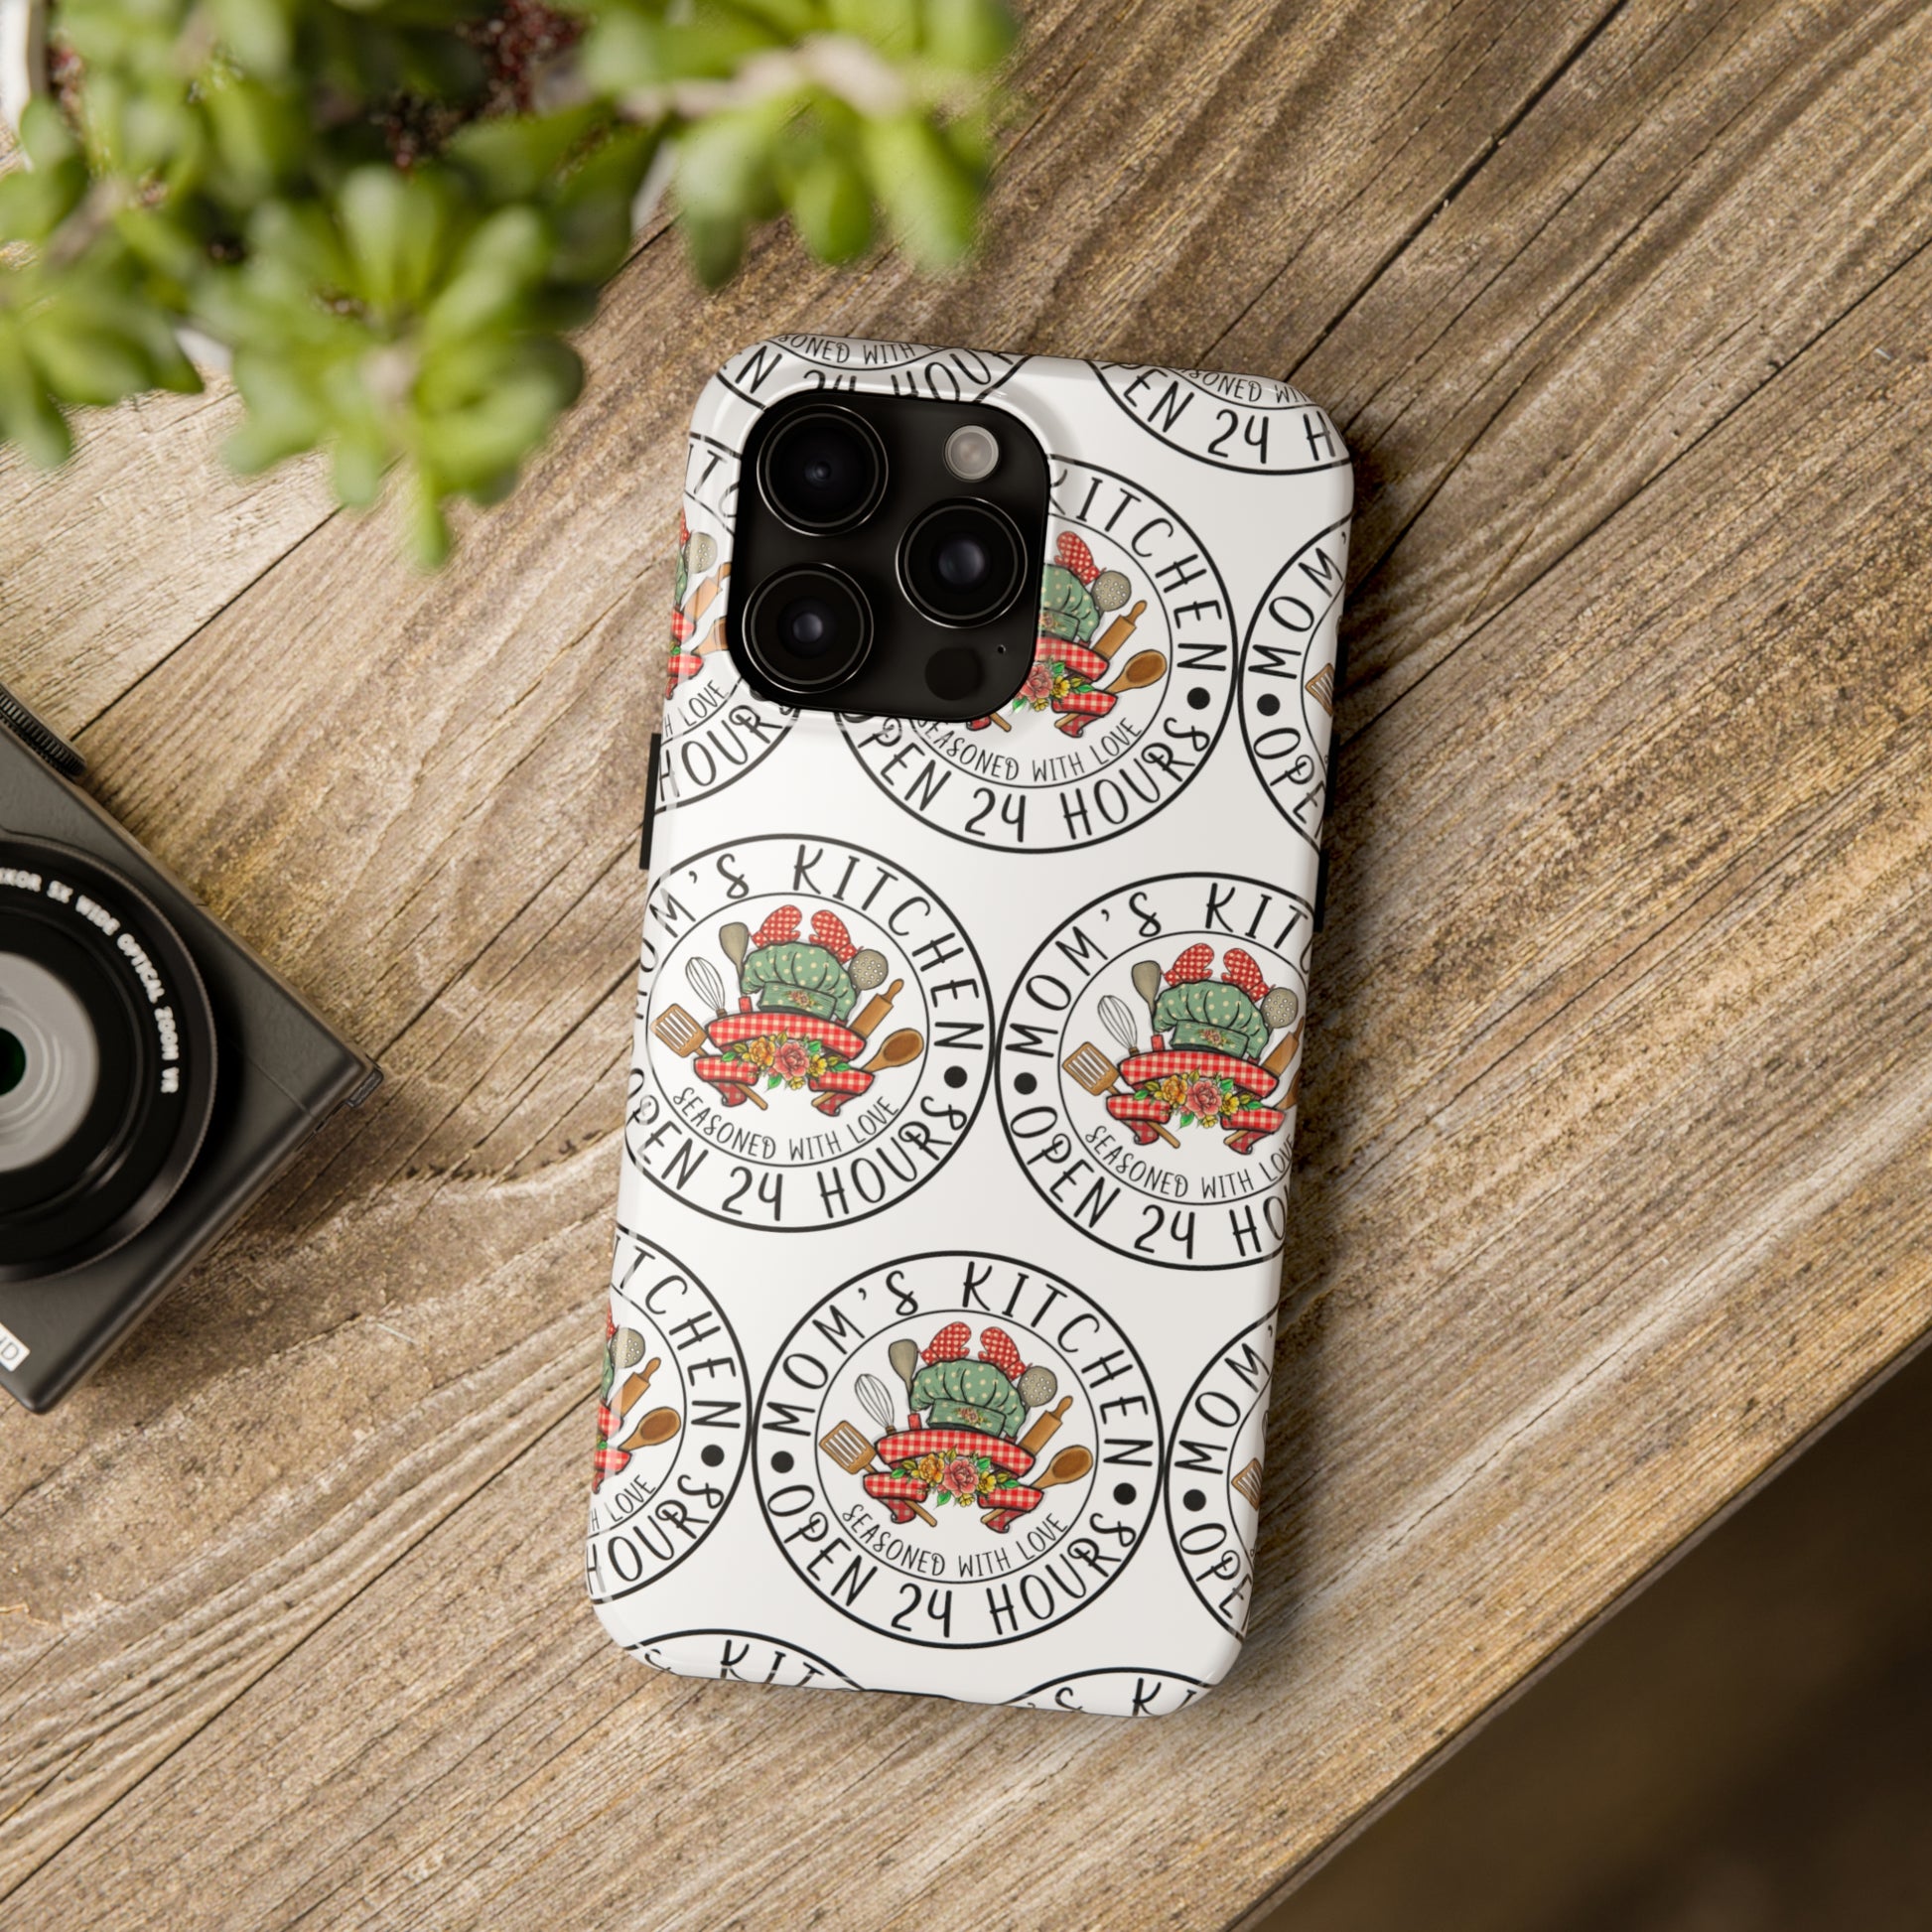 Mom's Kitchen: iPhone Tough Case Design - Wireless Charging - Superior Protection - Original Designs by TheGlassyLass.com